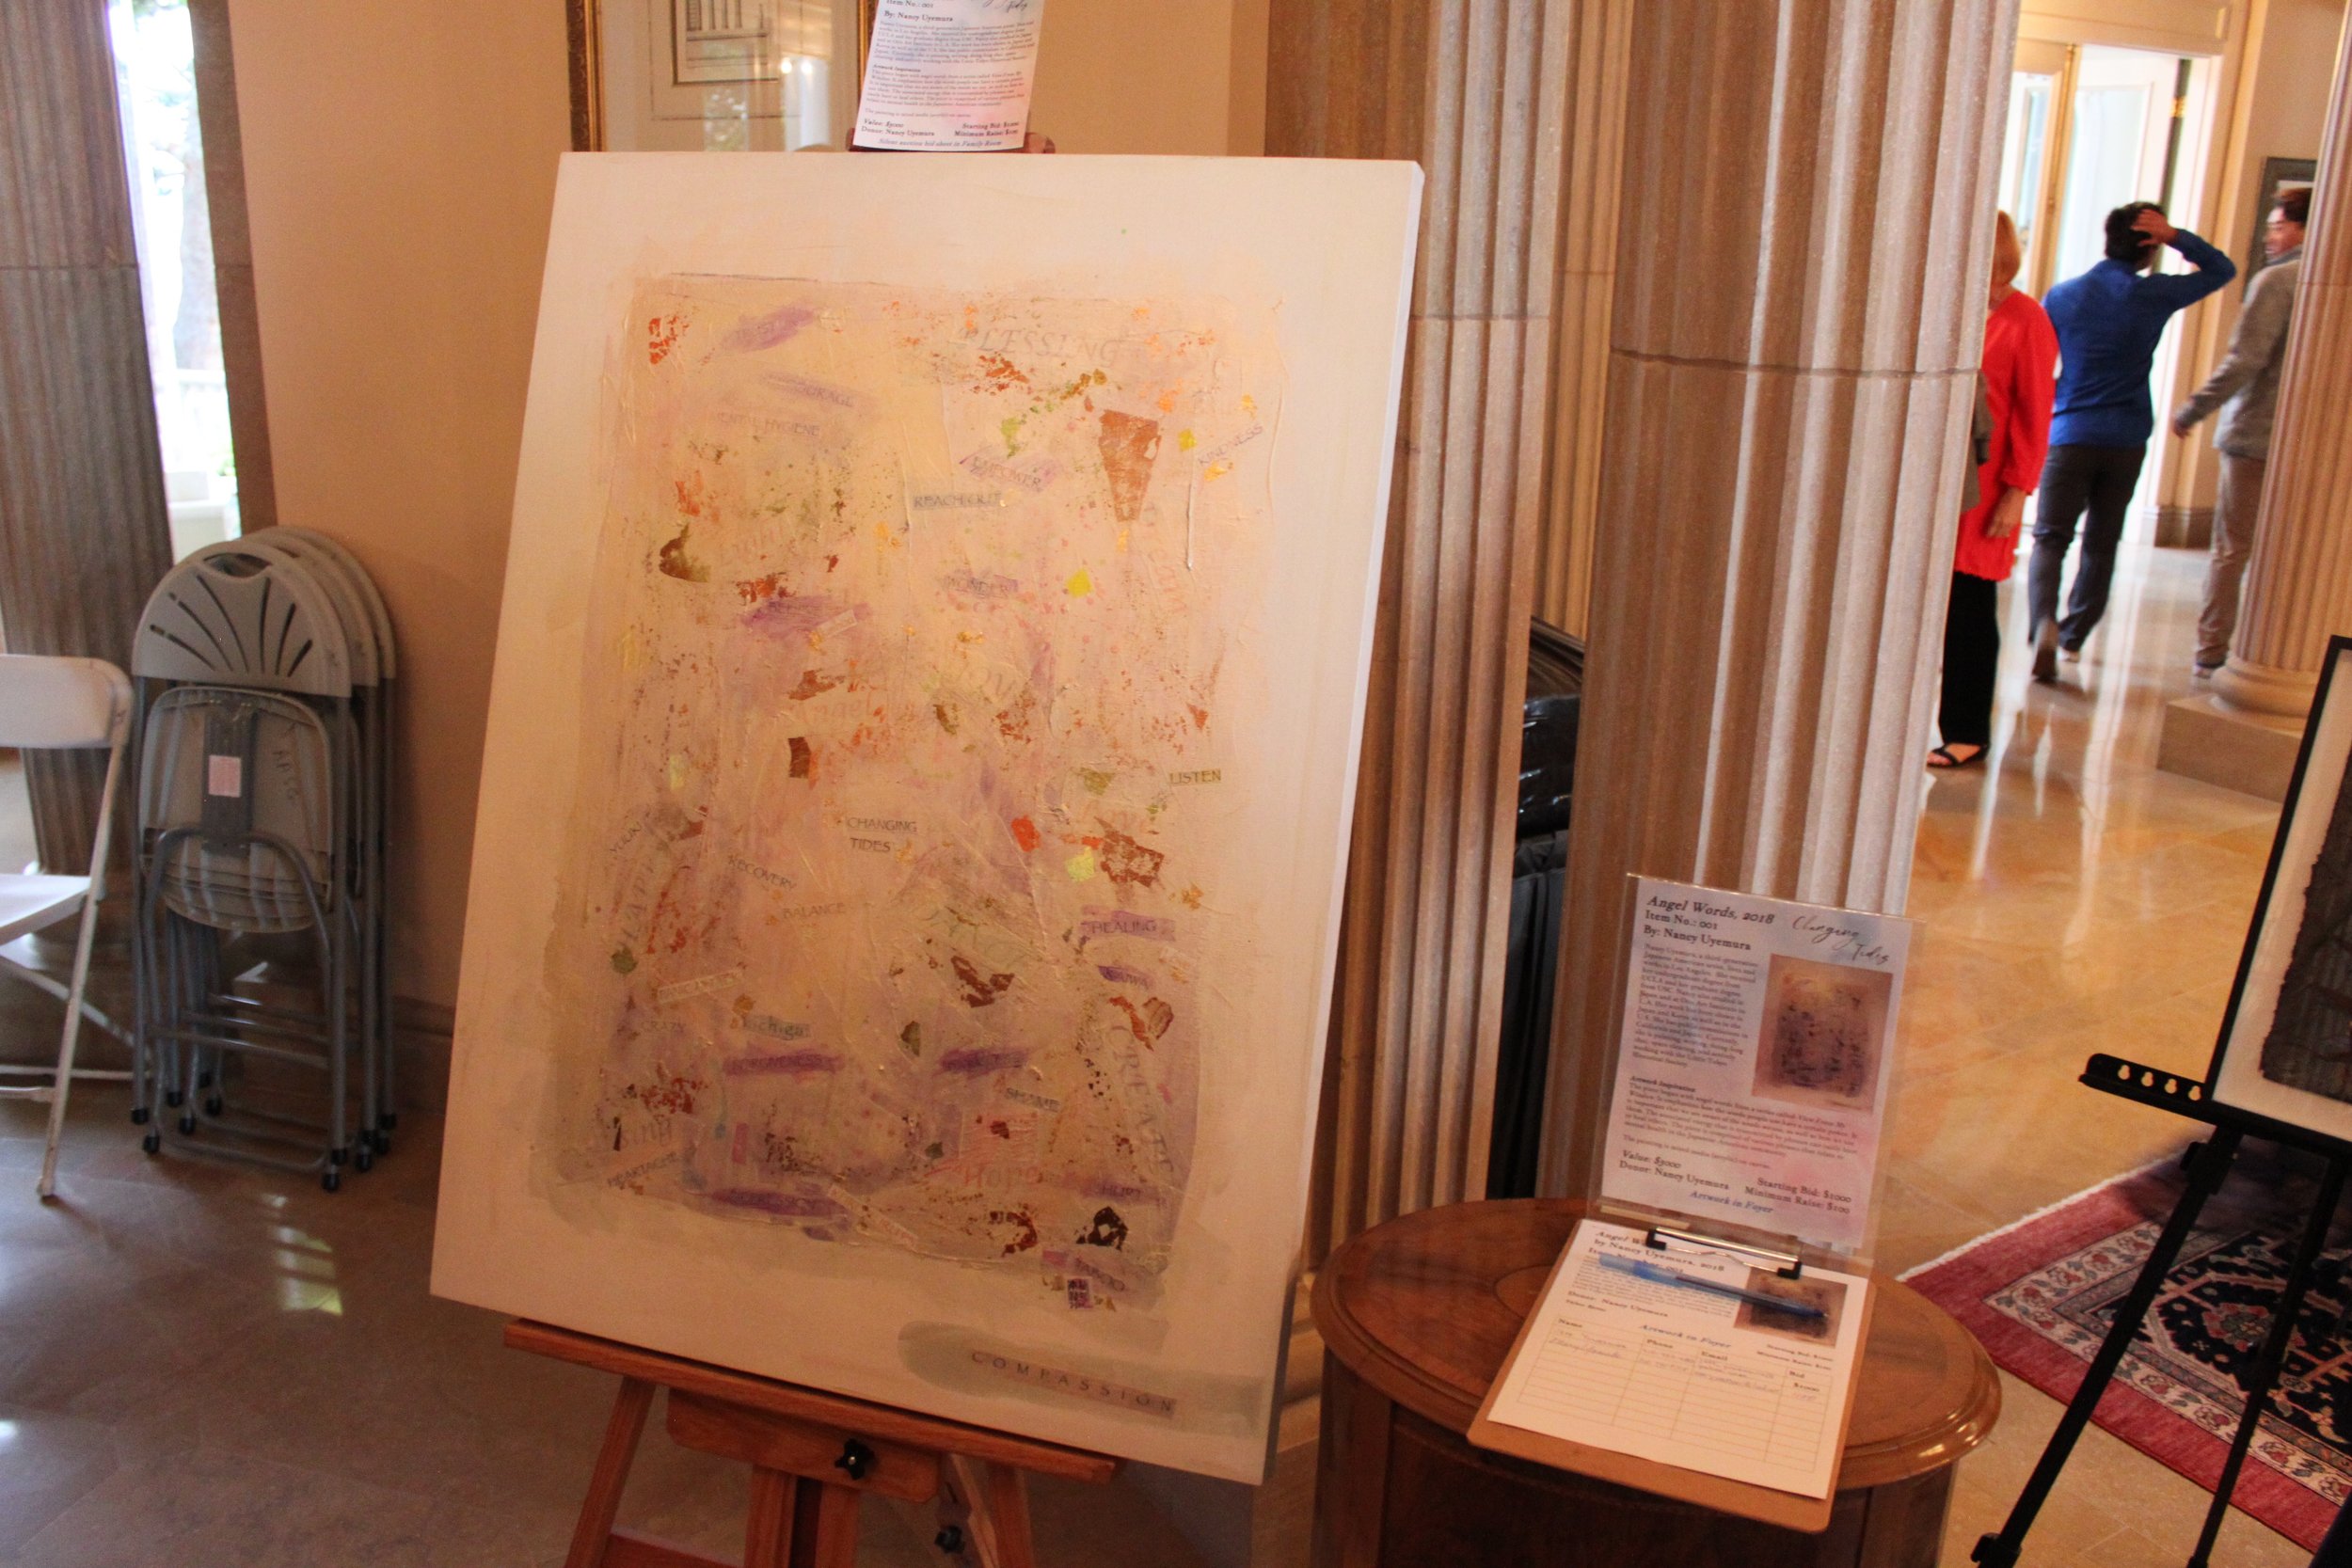 A large painting is displayed on an easel.